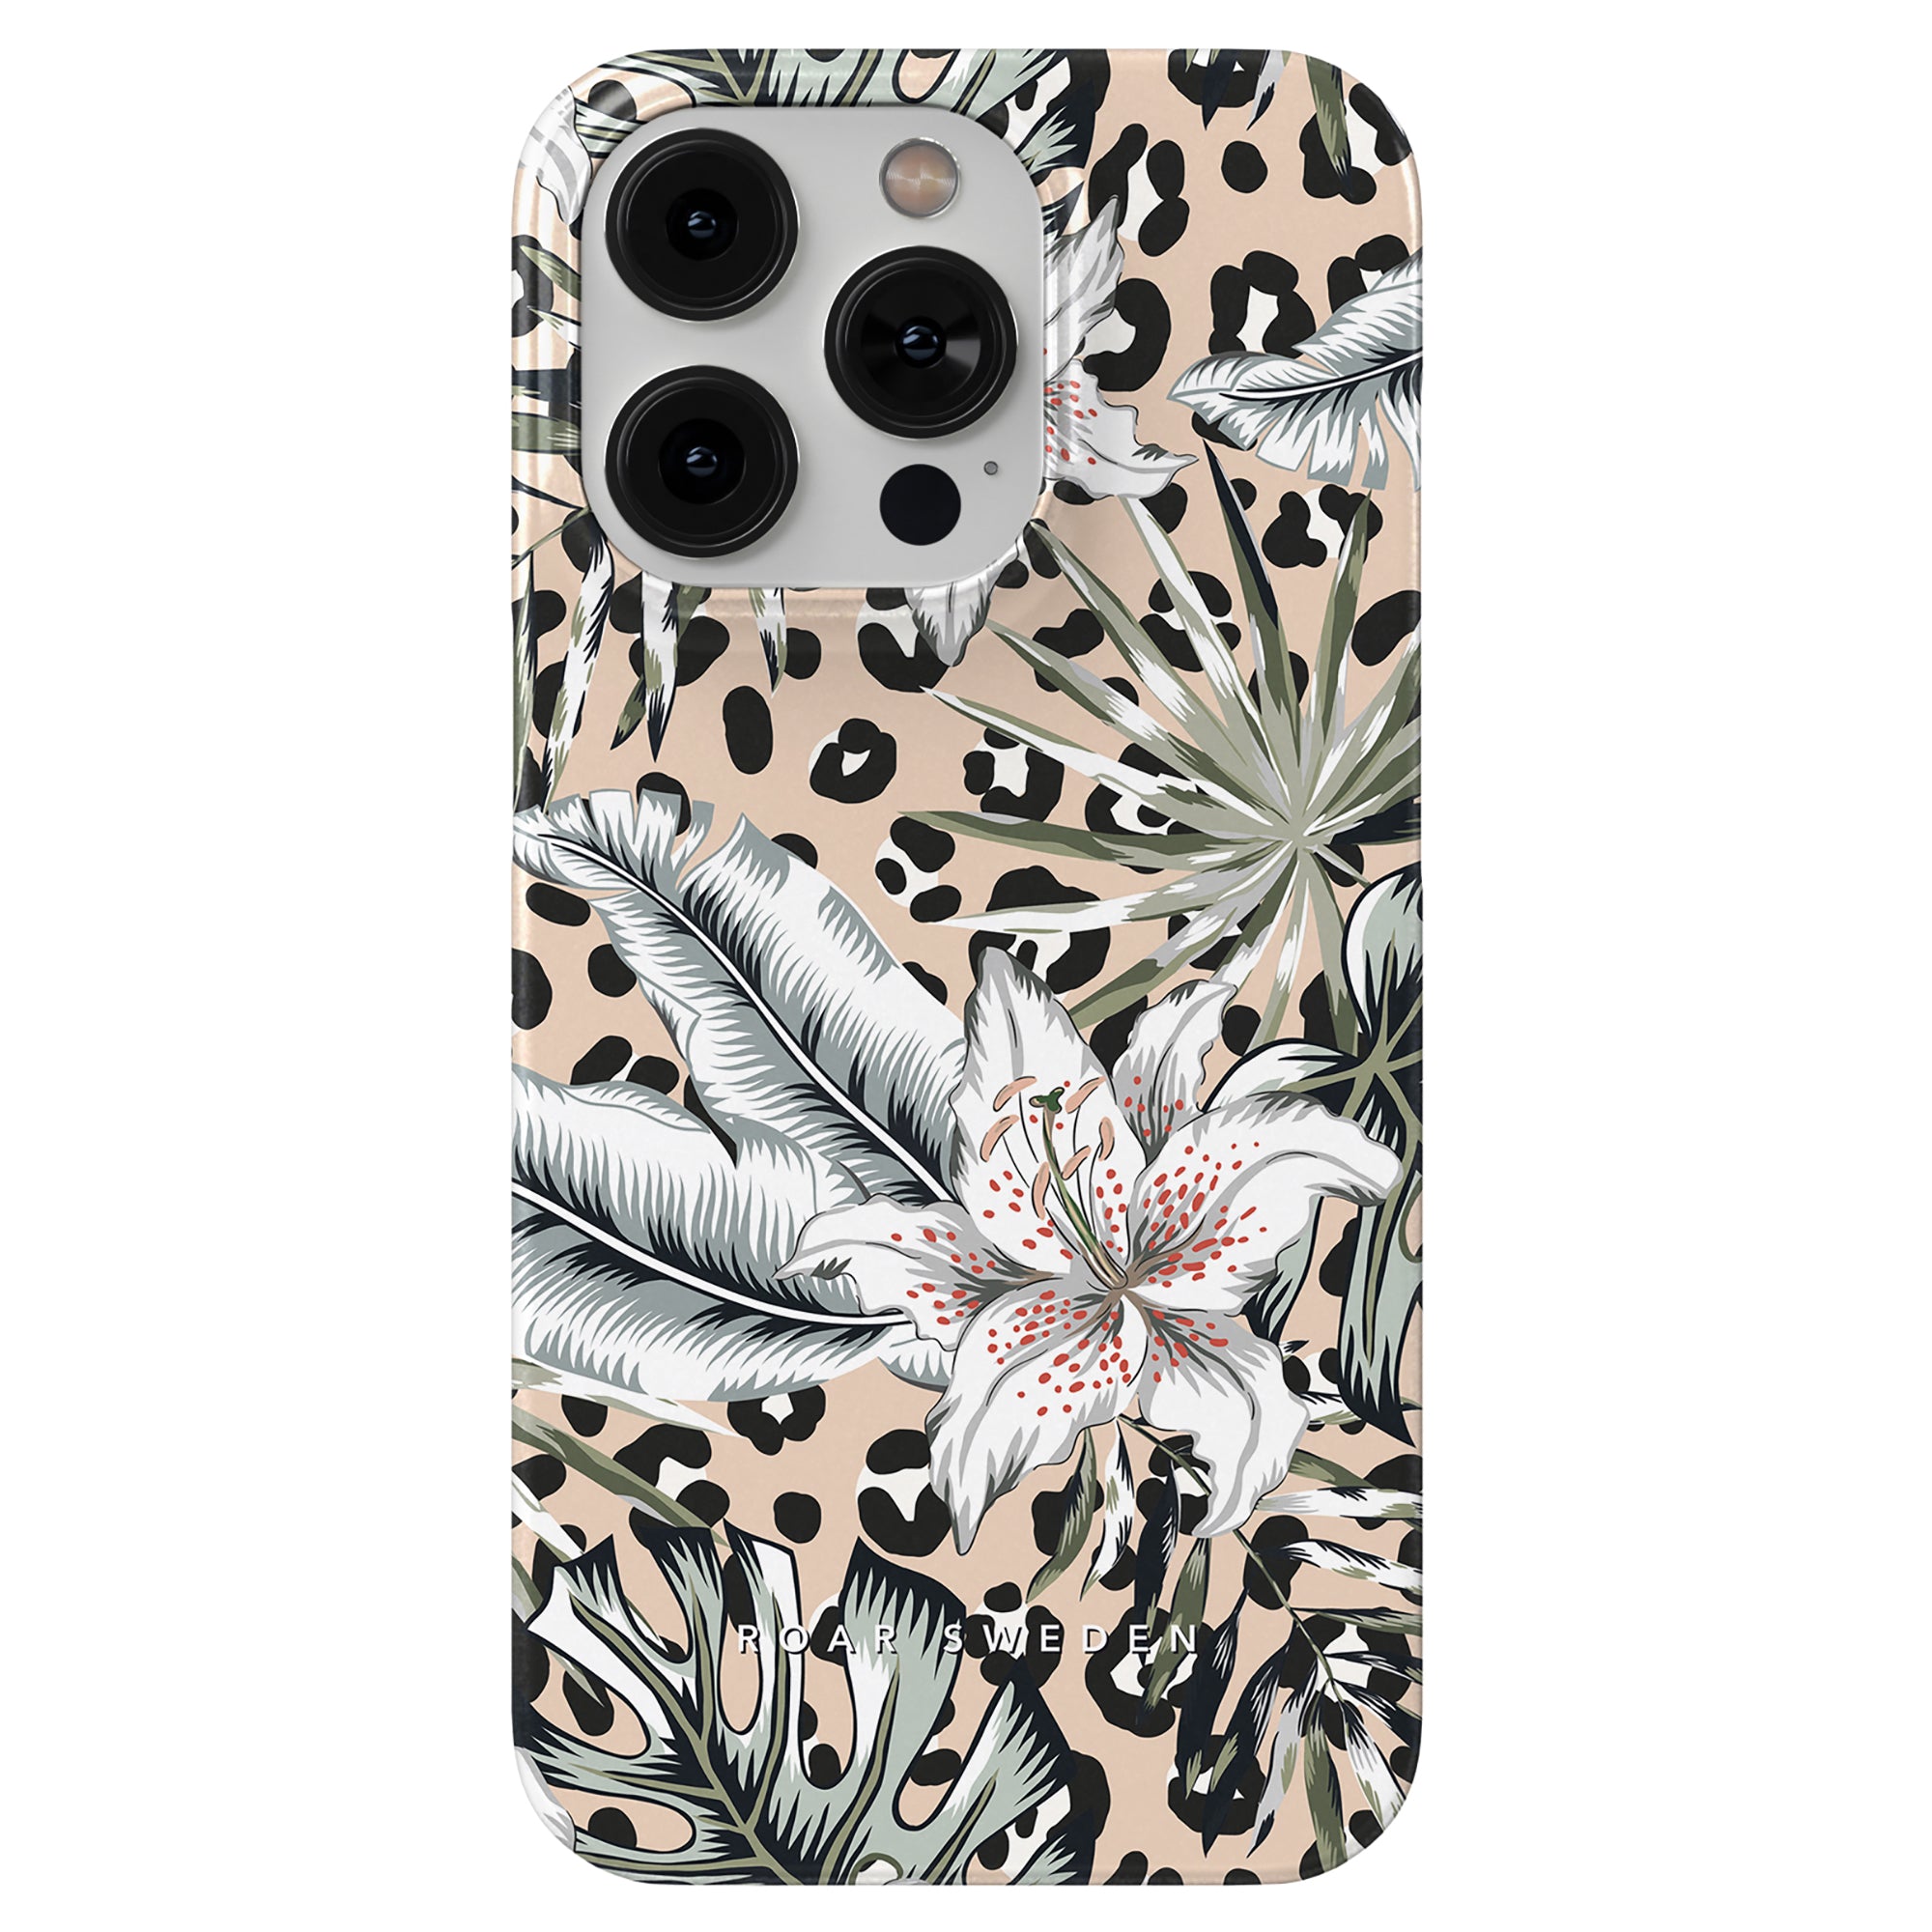 A trendy Senna - Slim case in leopard print for the stylish iPhone 11. Stand out from the crowd with this fashionable accessory that combines protection and style in one sleek package. The lightweight design ensures a slim profile.